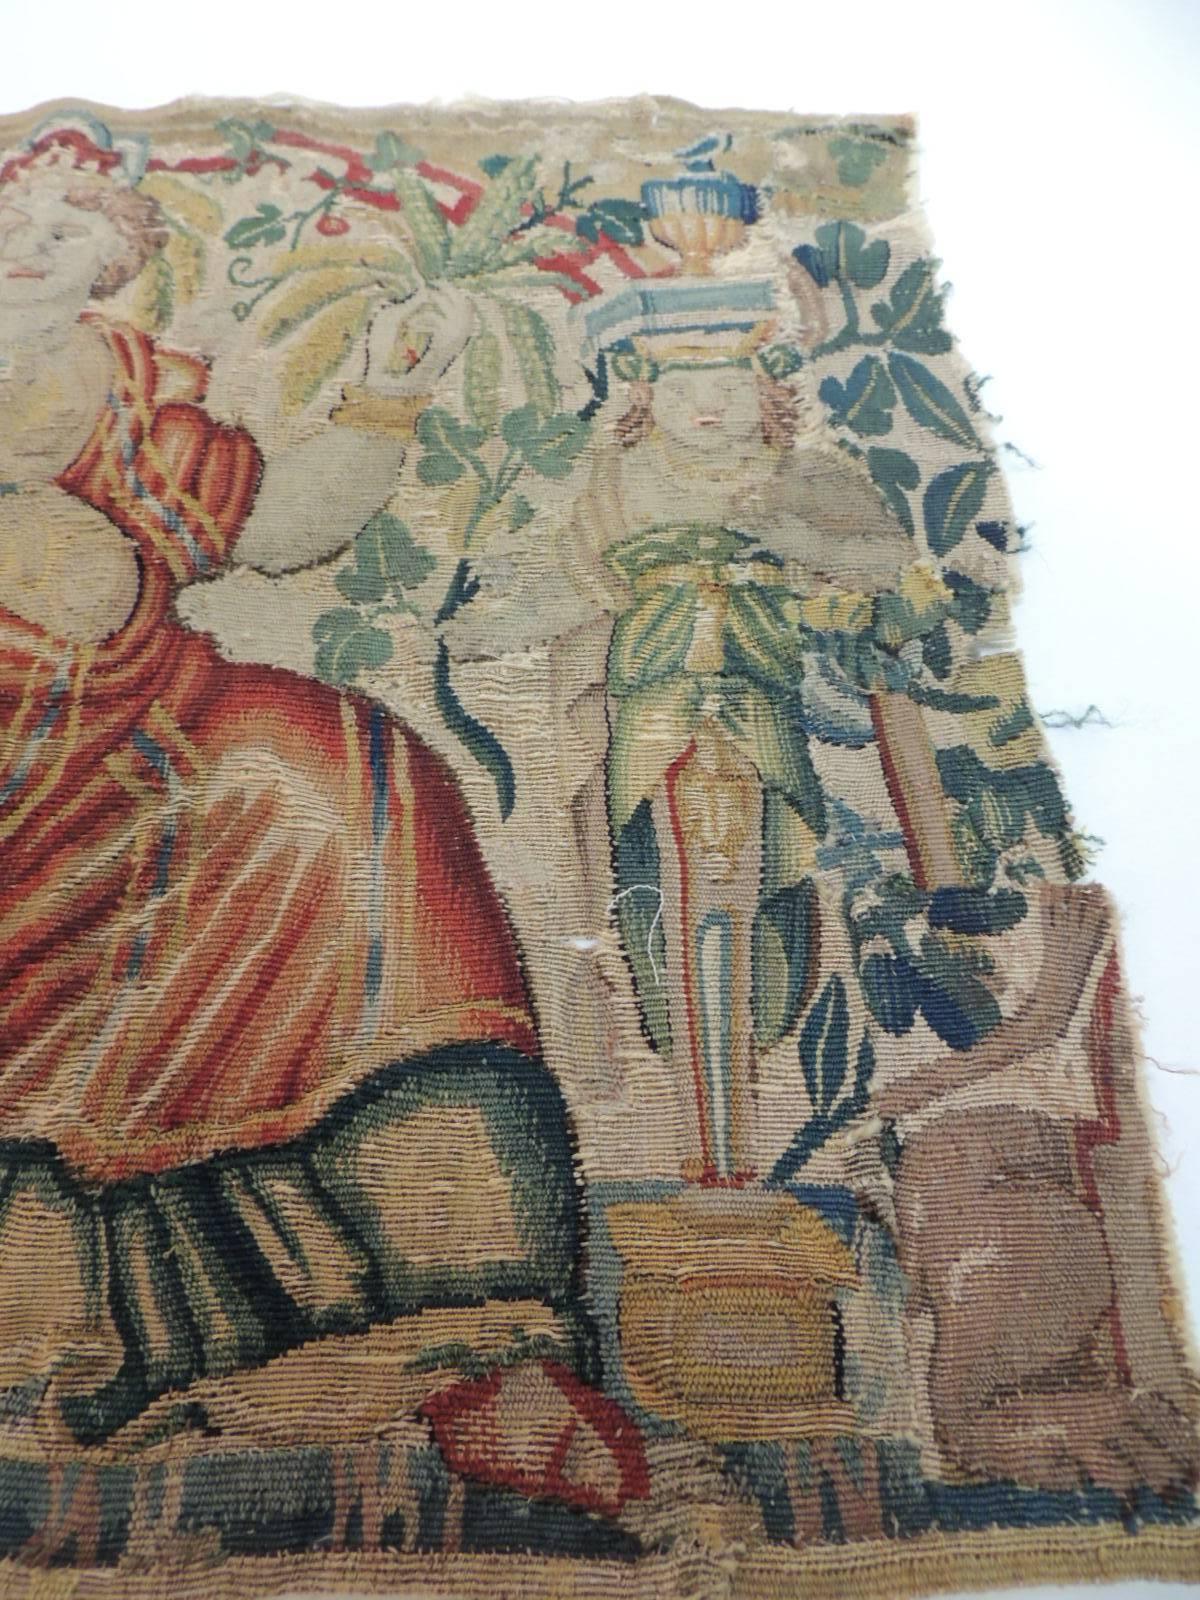 Hand-Crafted CLOSE OUT SALE: 18th Century Aubusson Tapestry Panel of Goddess in a Red Cape